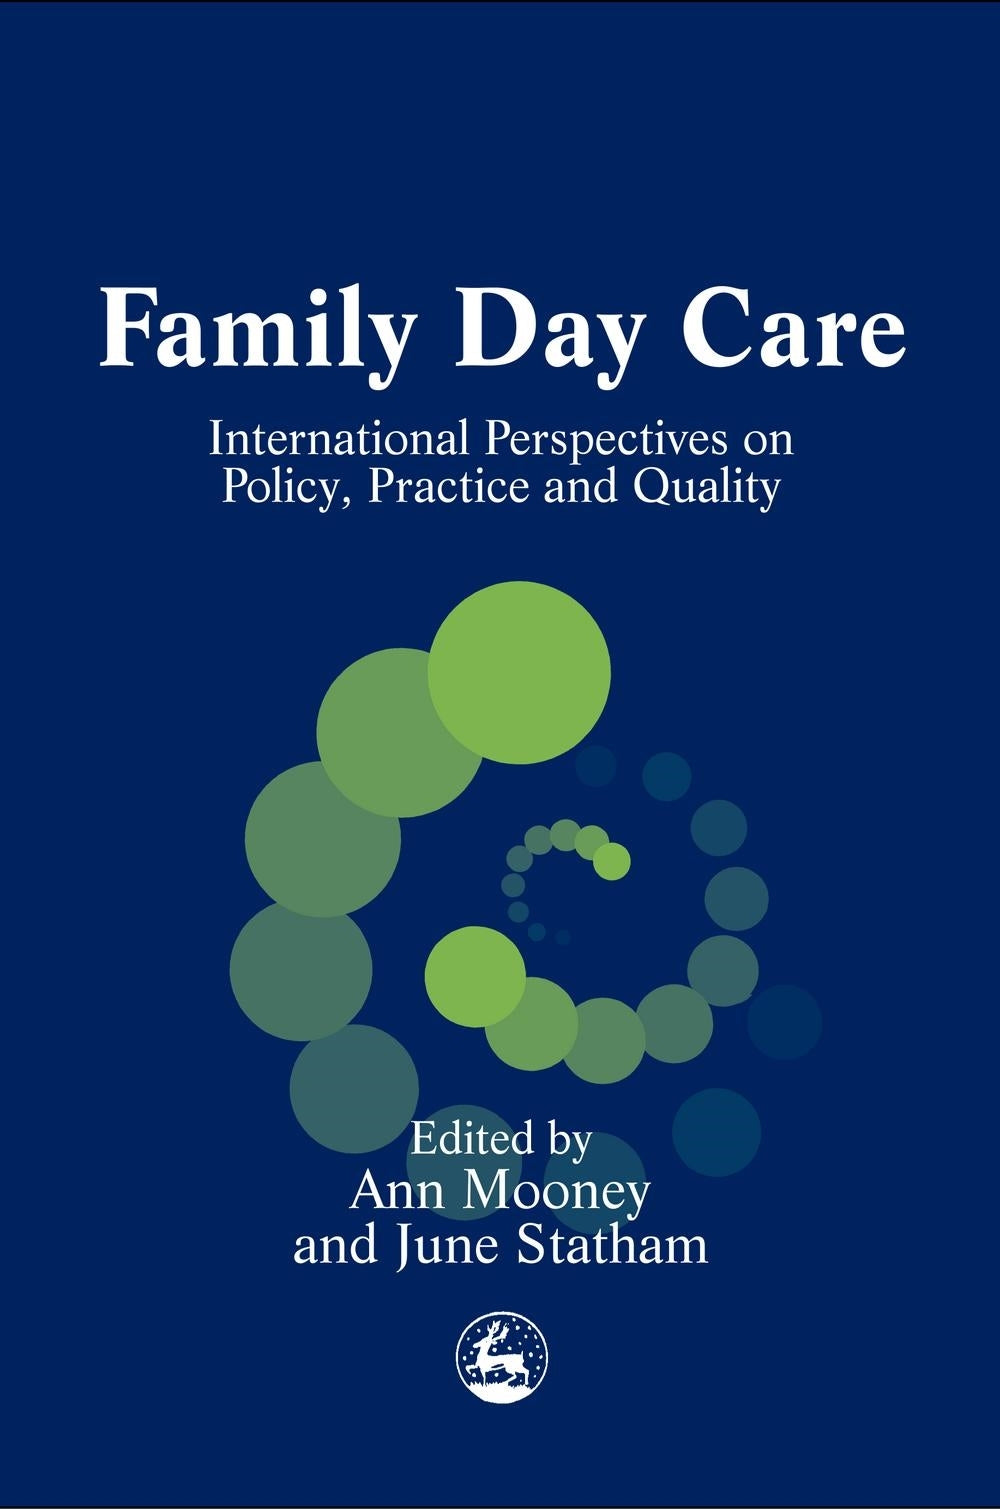 Family Day Care by June Statham, Ann Mooney